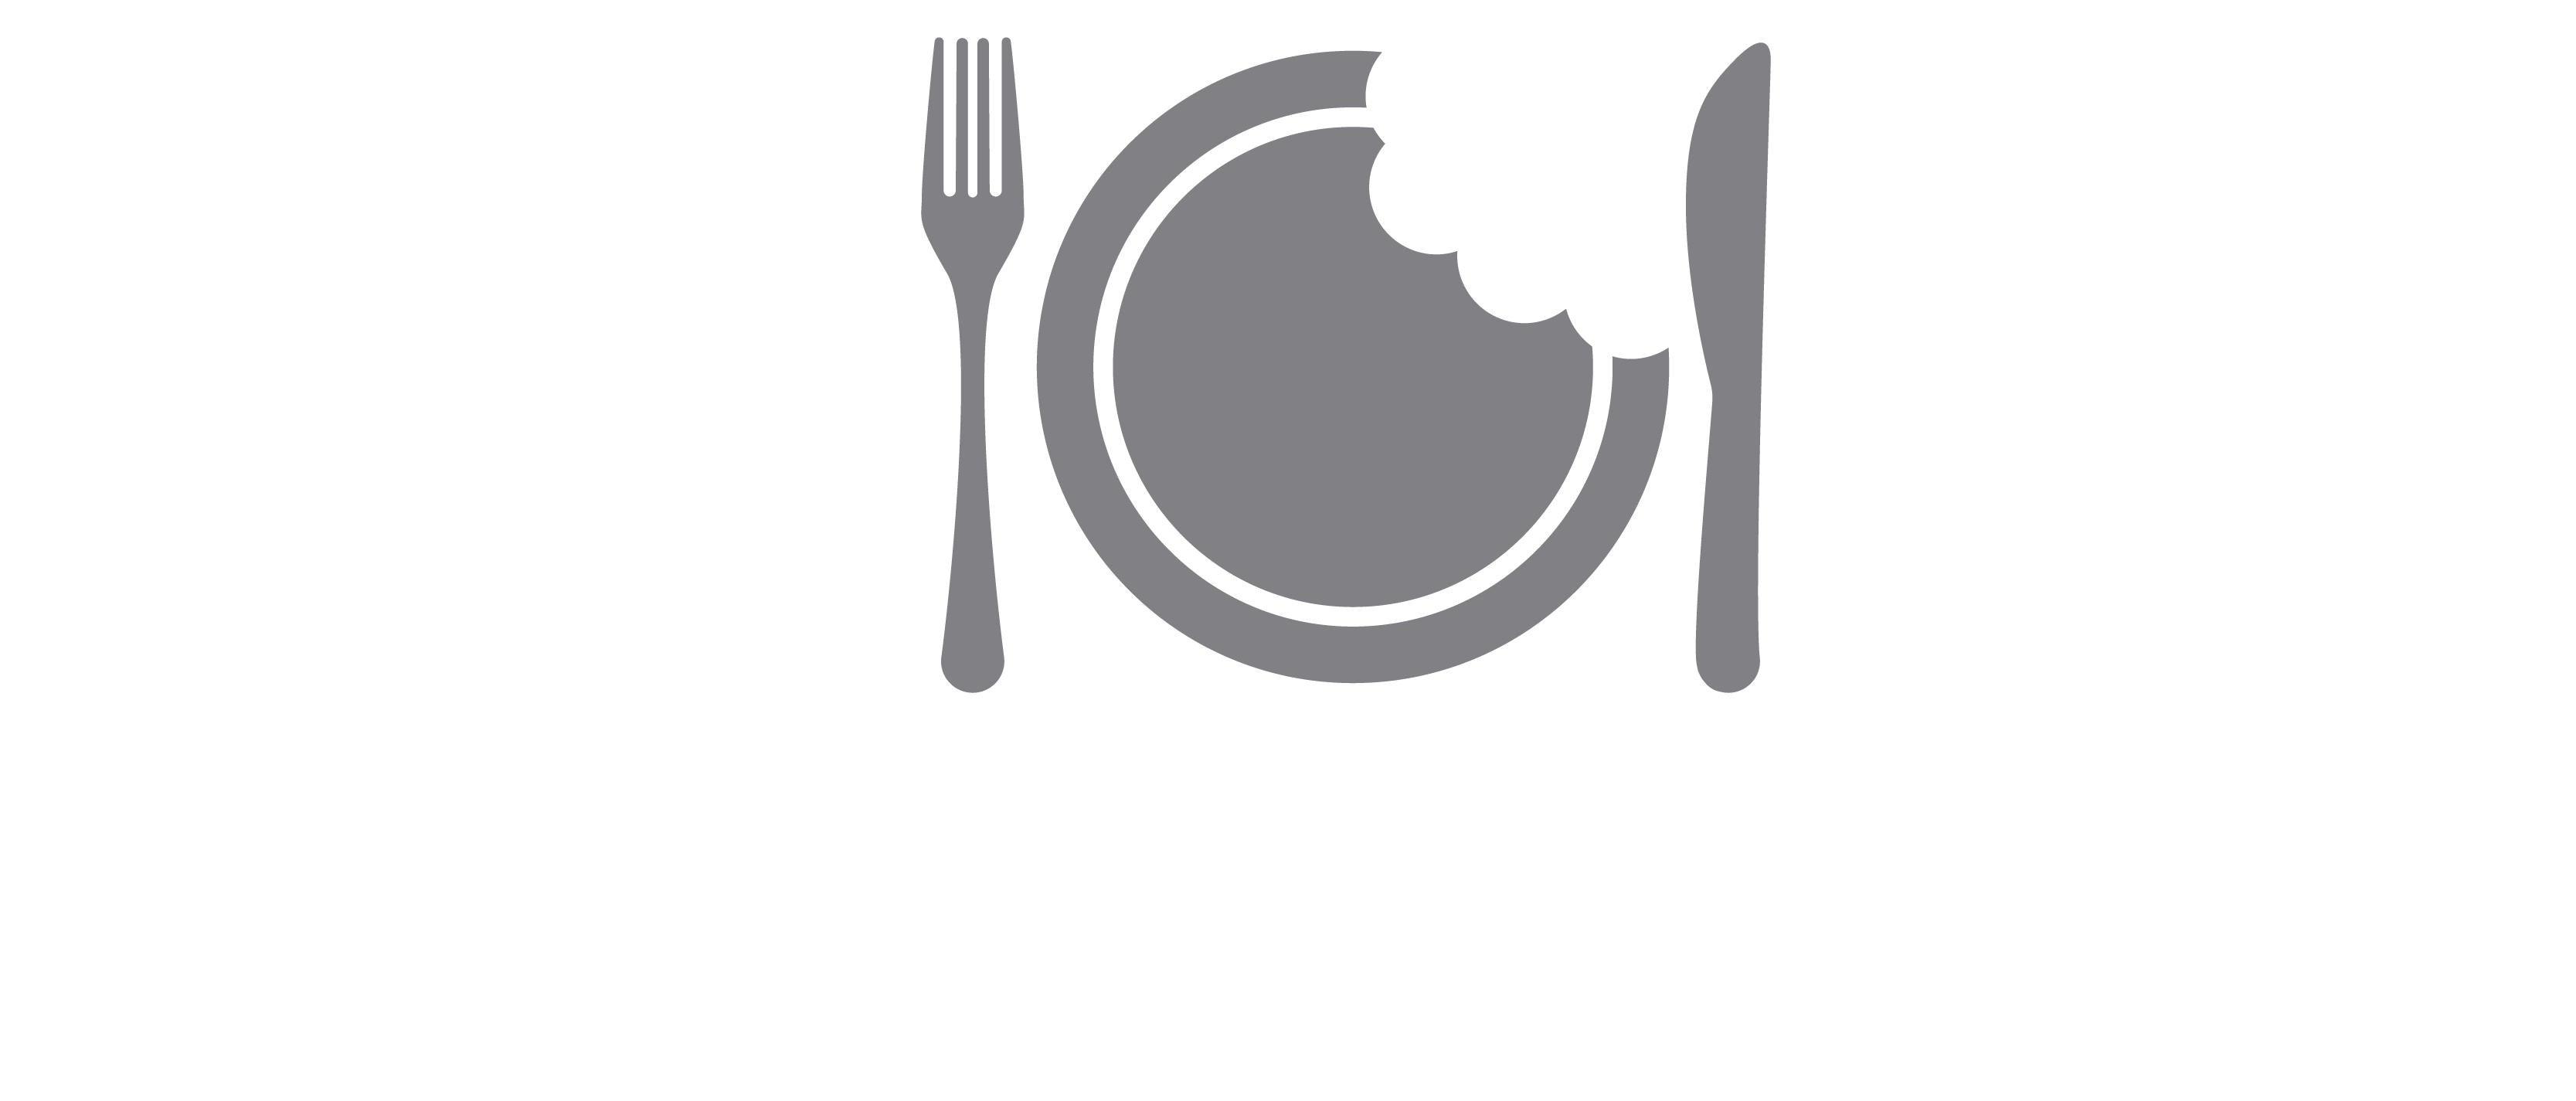 JK Consulting White